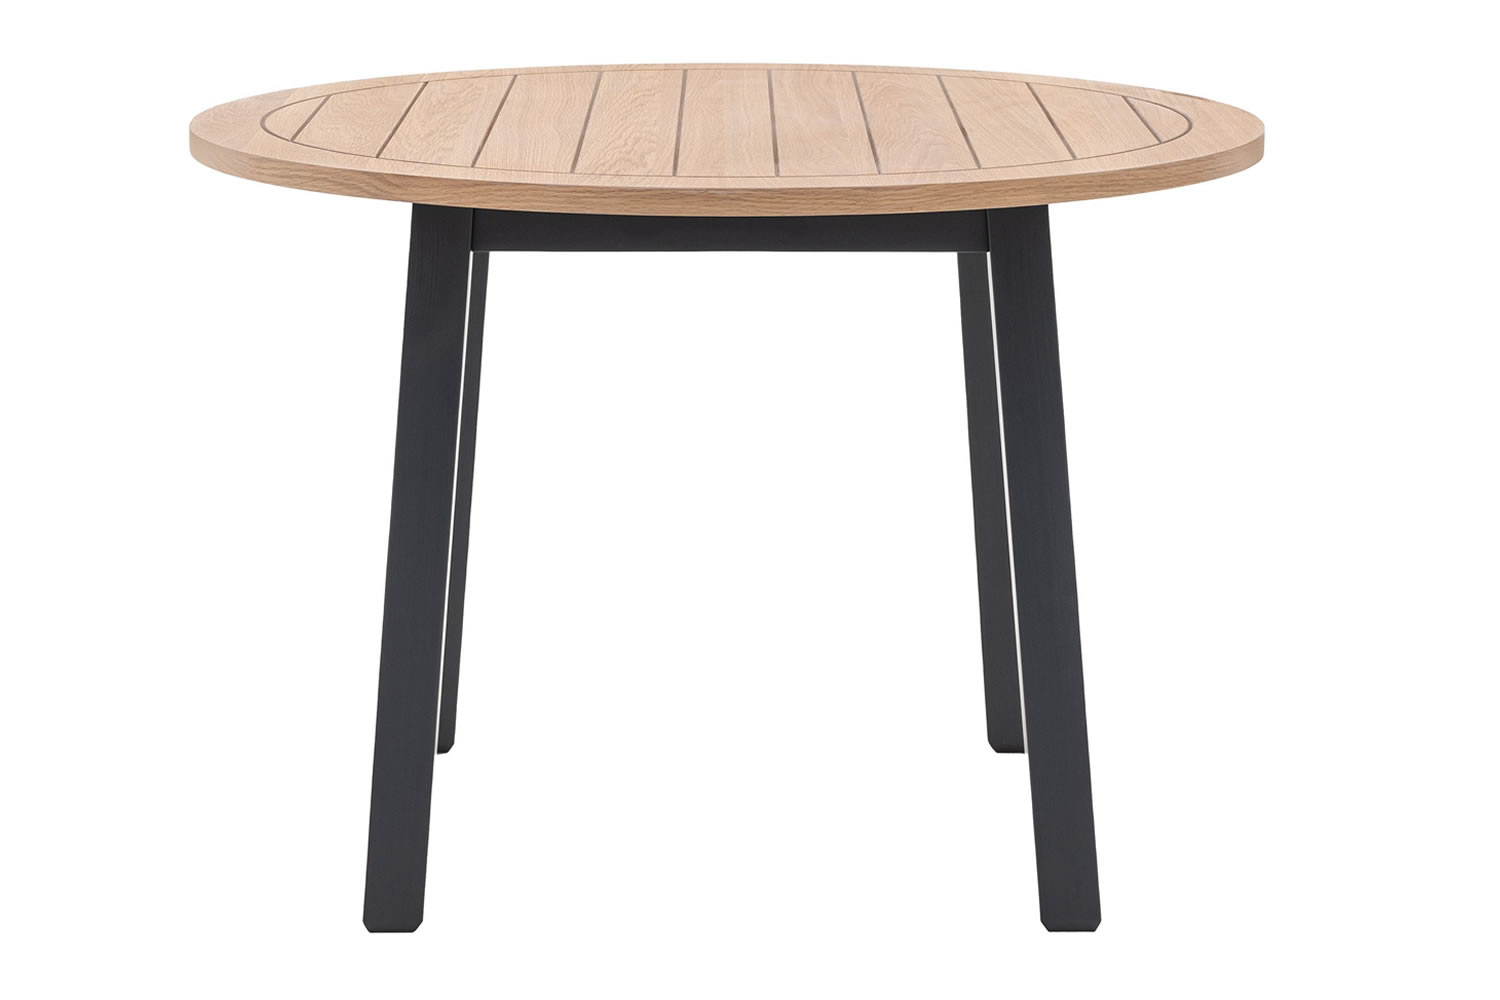 View Eton Meteor Round Dining Table Crafted From Oak Pine MDF Solid Oak Top With Grooved Planked Design Sturdy Legs Seats Up To 4 People information